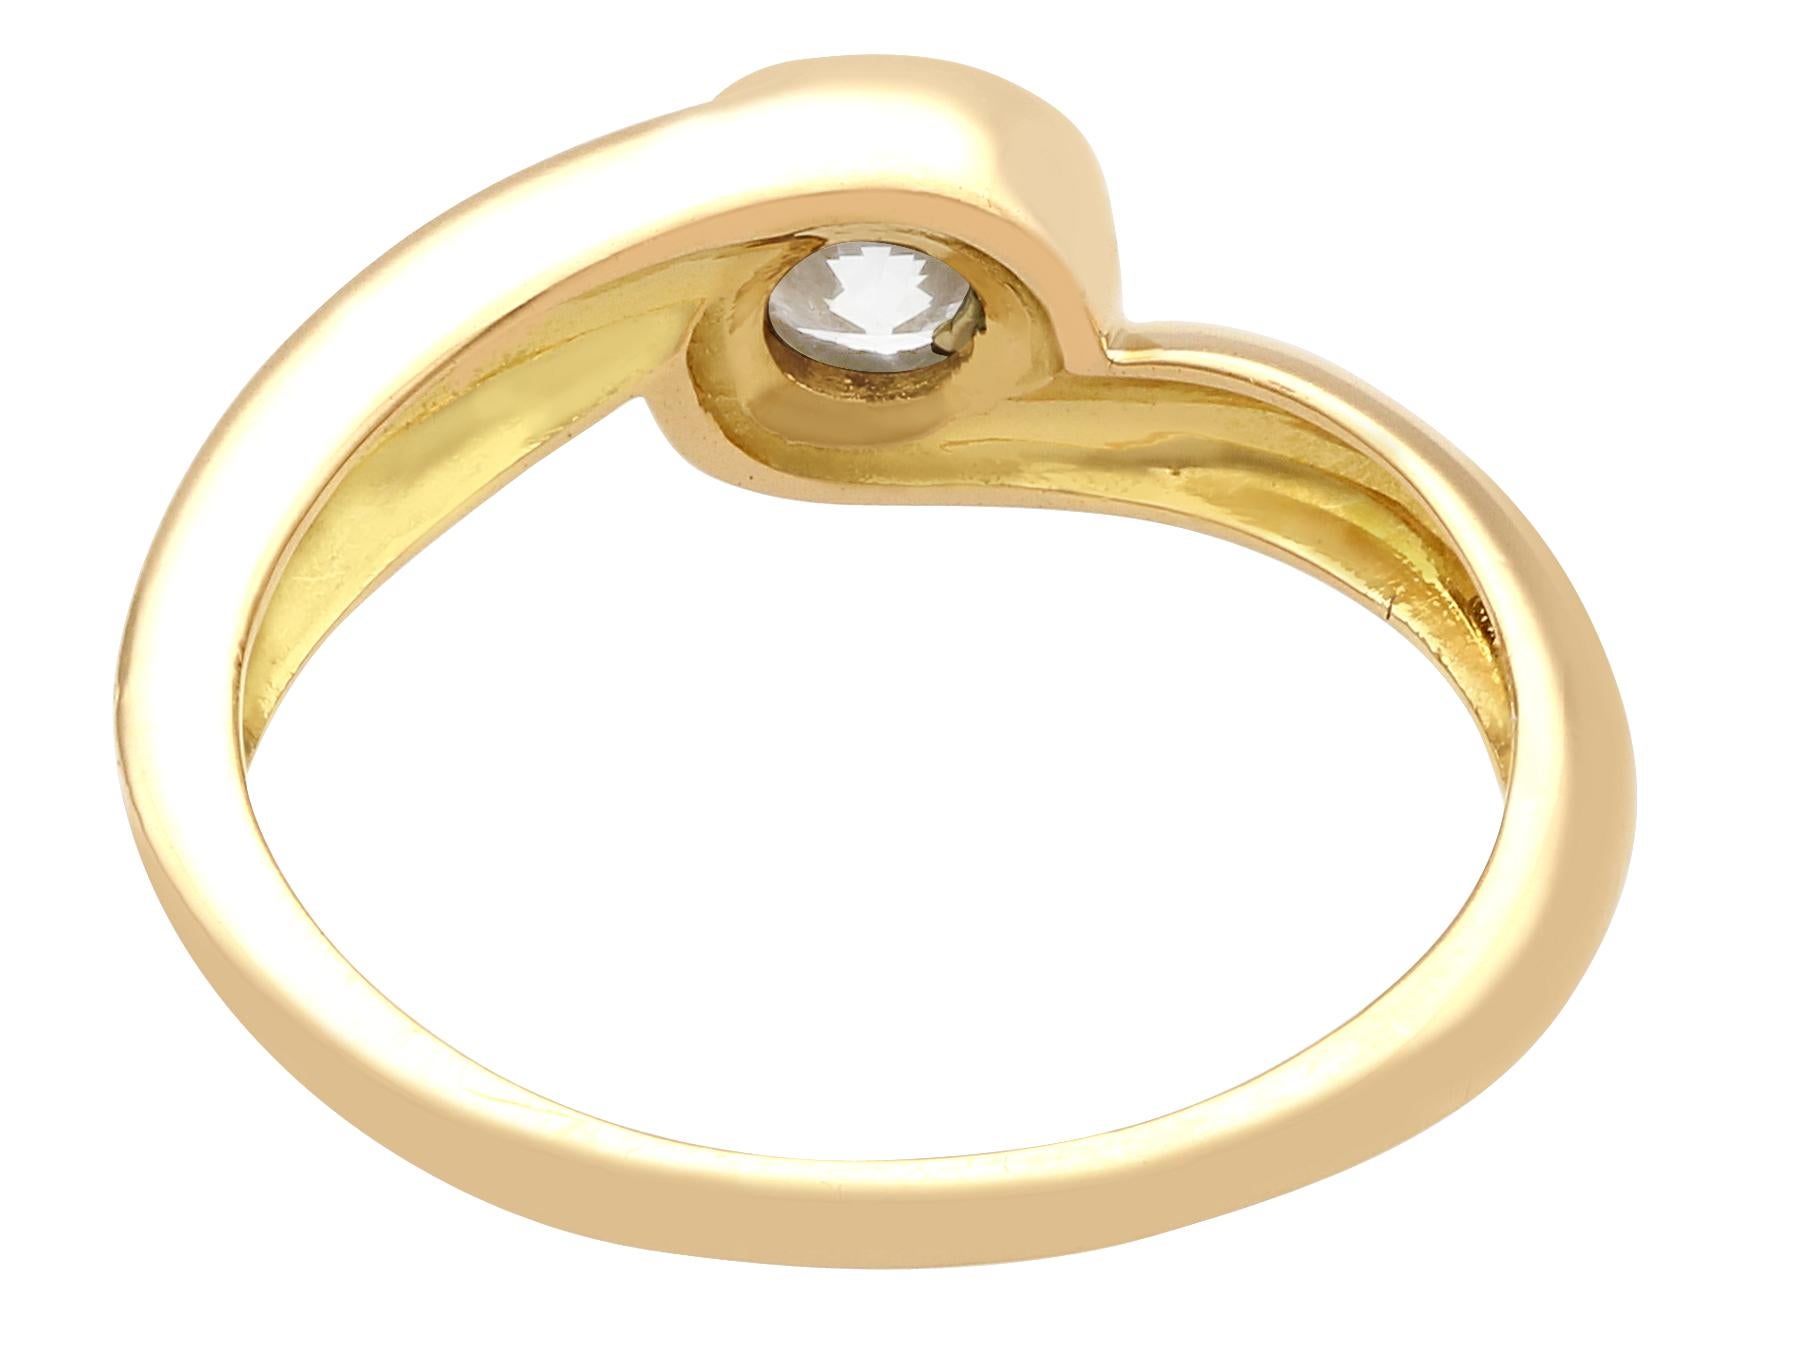 1950s French Diamond and Yellow Gold Twist Solitaire Ring In Excellent Condition For Sale In Jesmond, Newcastle Upon Tyne